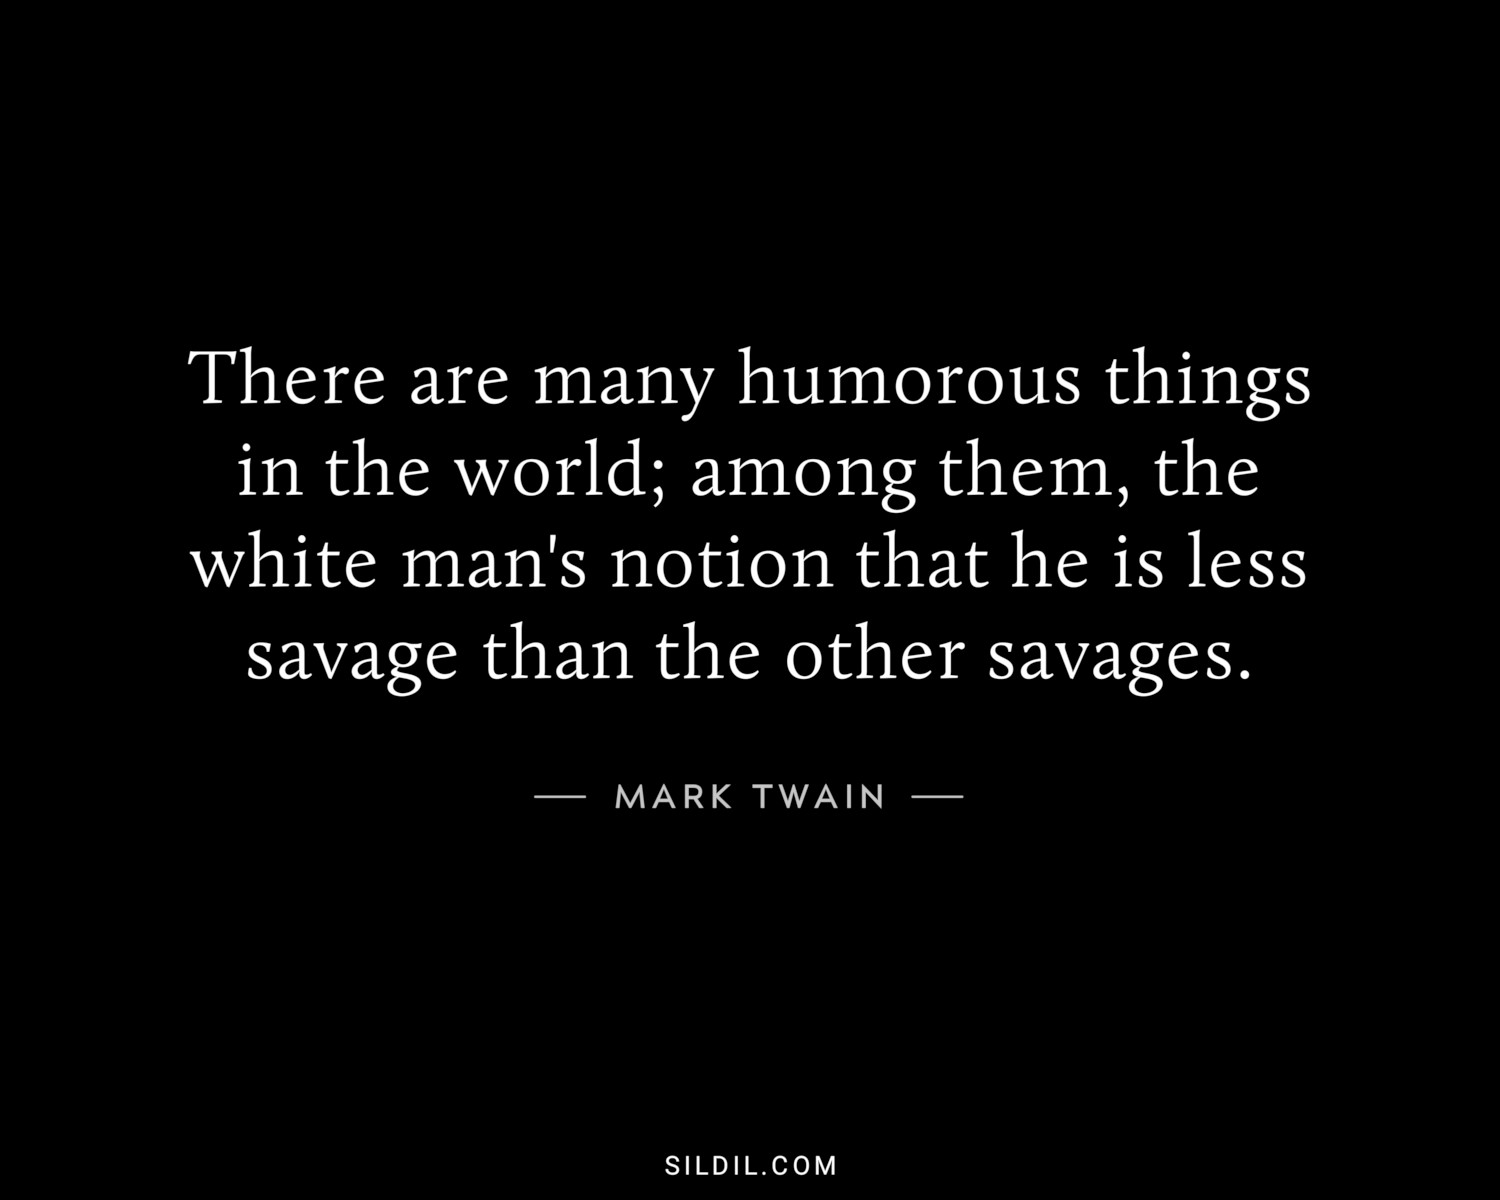 There are many humorous things in the world; among them, the white man's notion that he is less savage than the other savages.